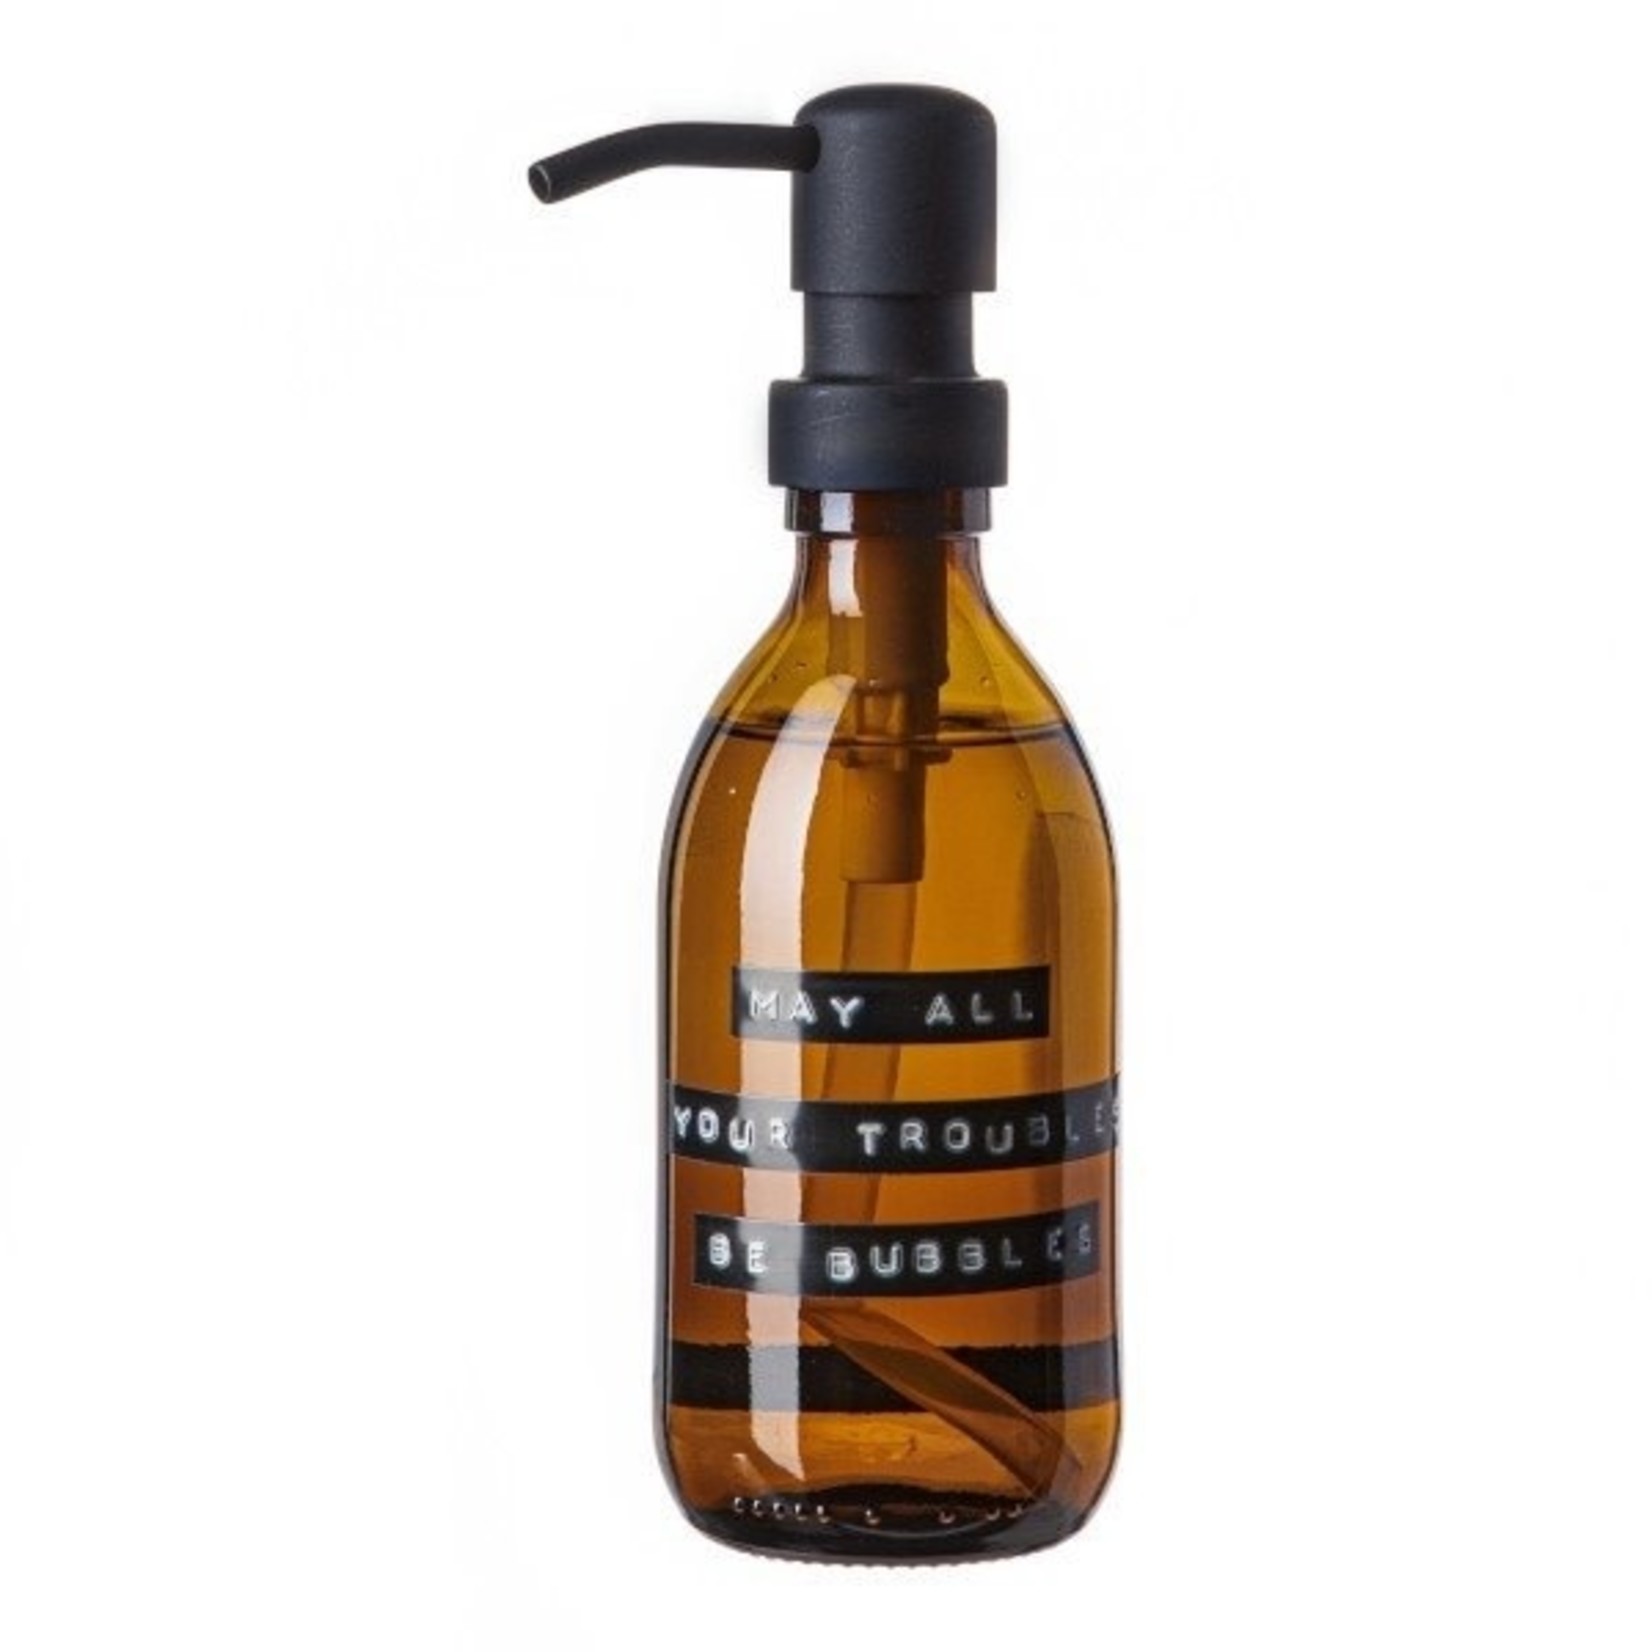 Wellmark Soap dispenser Amber gGass Bamboo Hand Soap 250ml. May All Your Troubles Be Bubbles Black